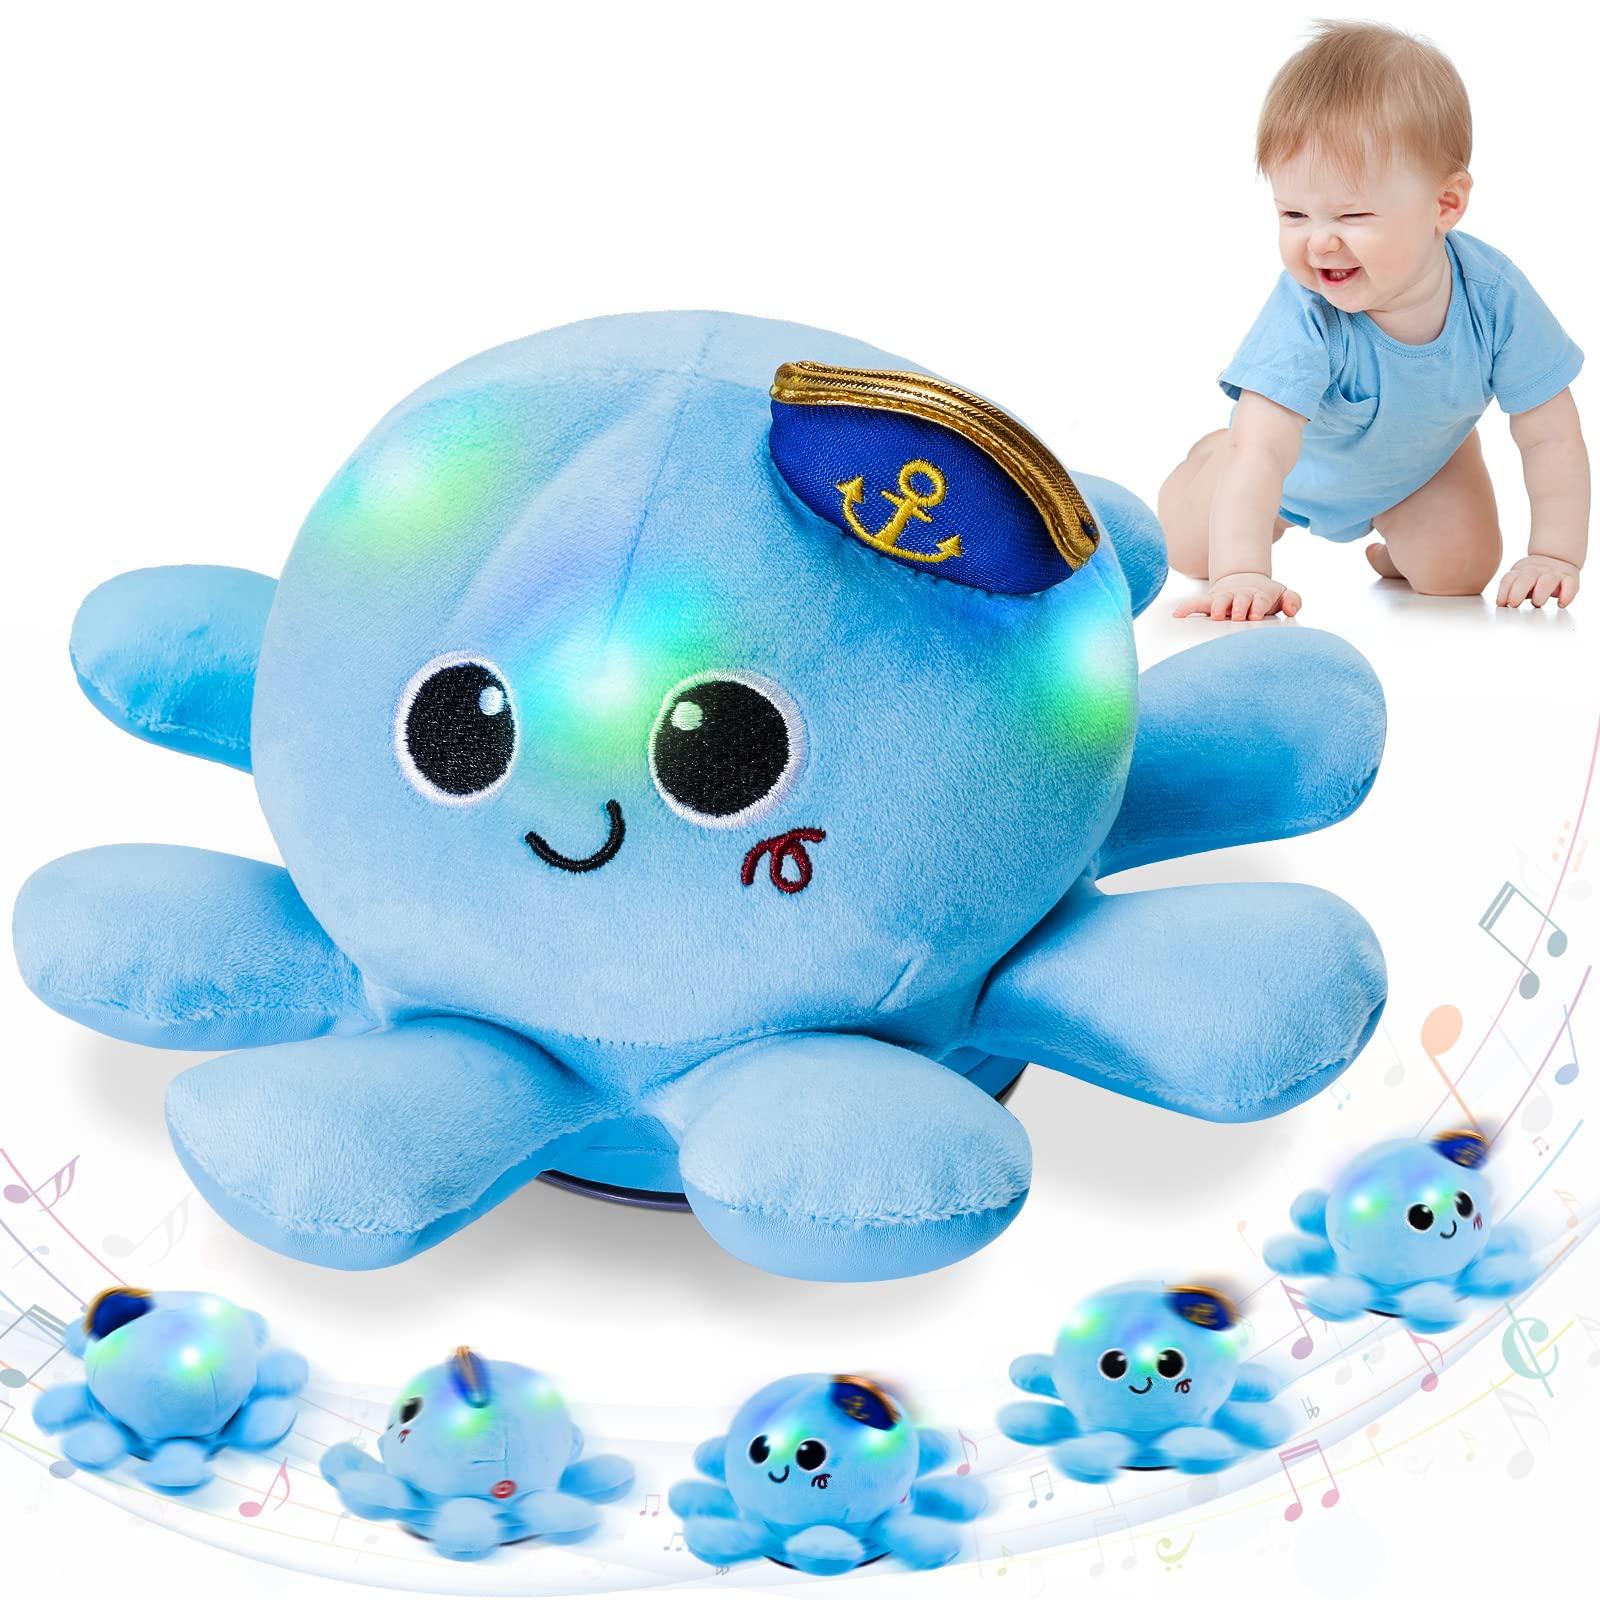 FancyWhoop Baby Musical Light Crawling Toys - Light up Dancing Spinning Walking Soft Octopus Toy for Boys Girls Kids, Sensory Interactive Baby Gifts for Toddlers